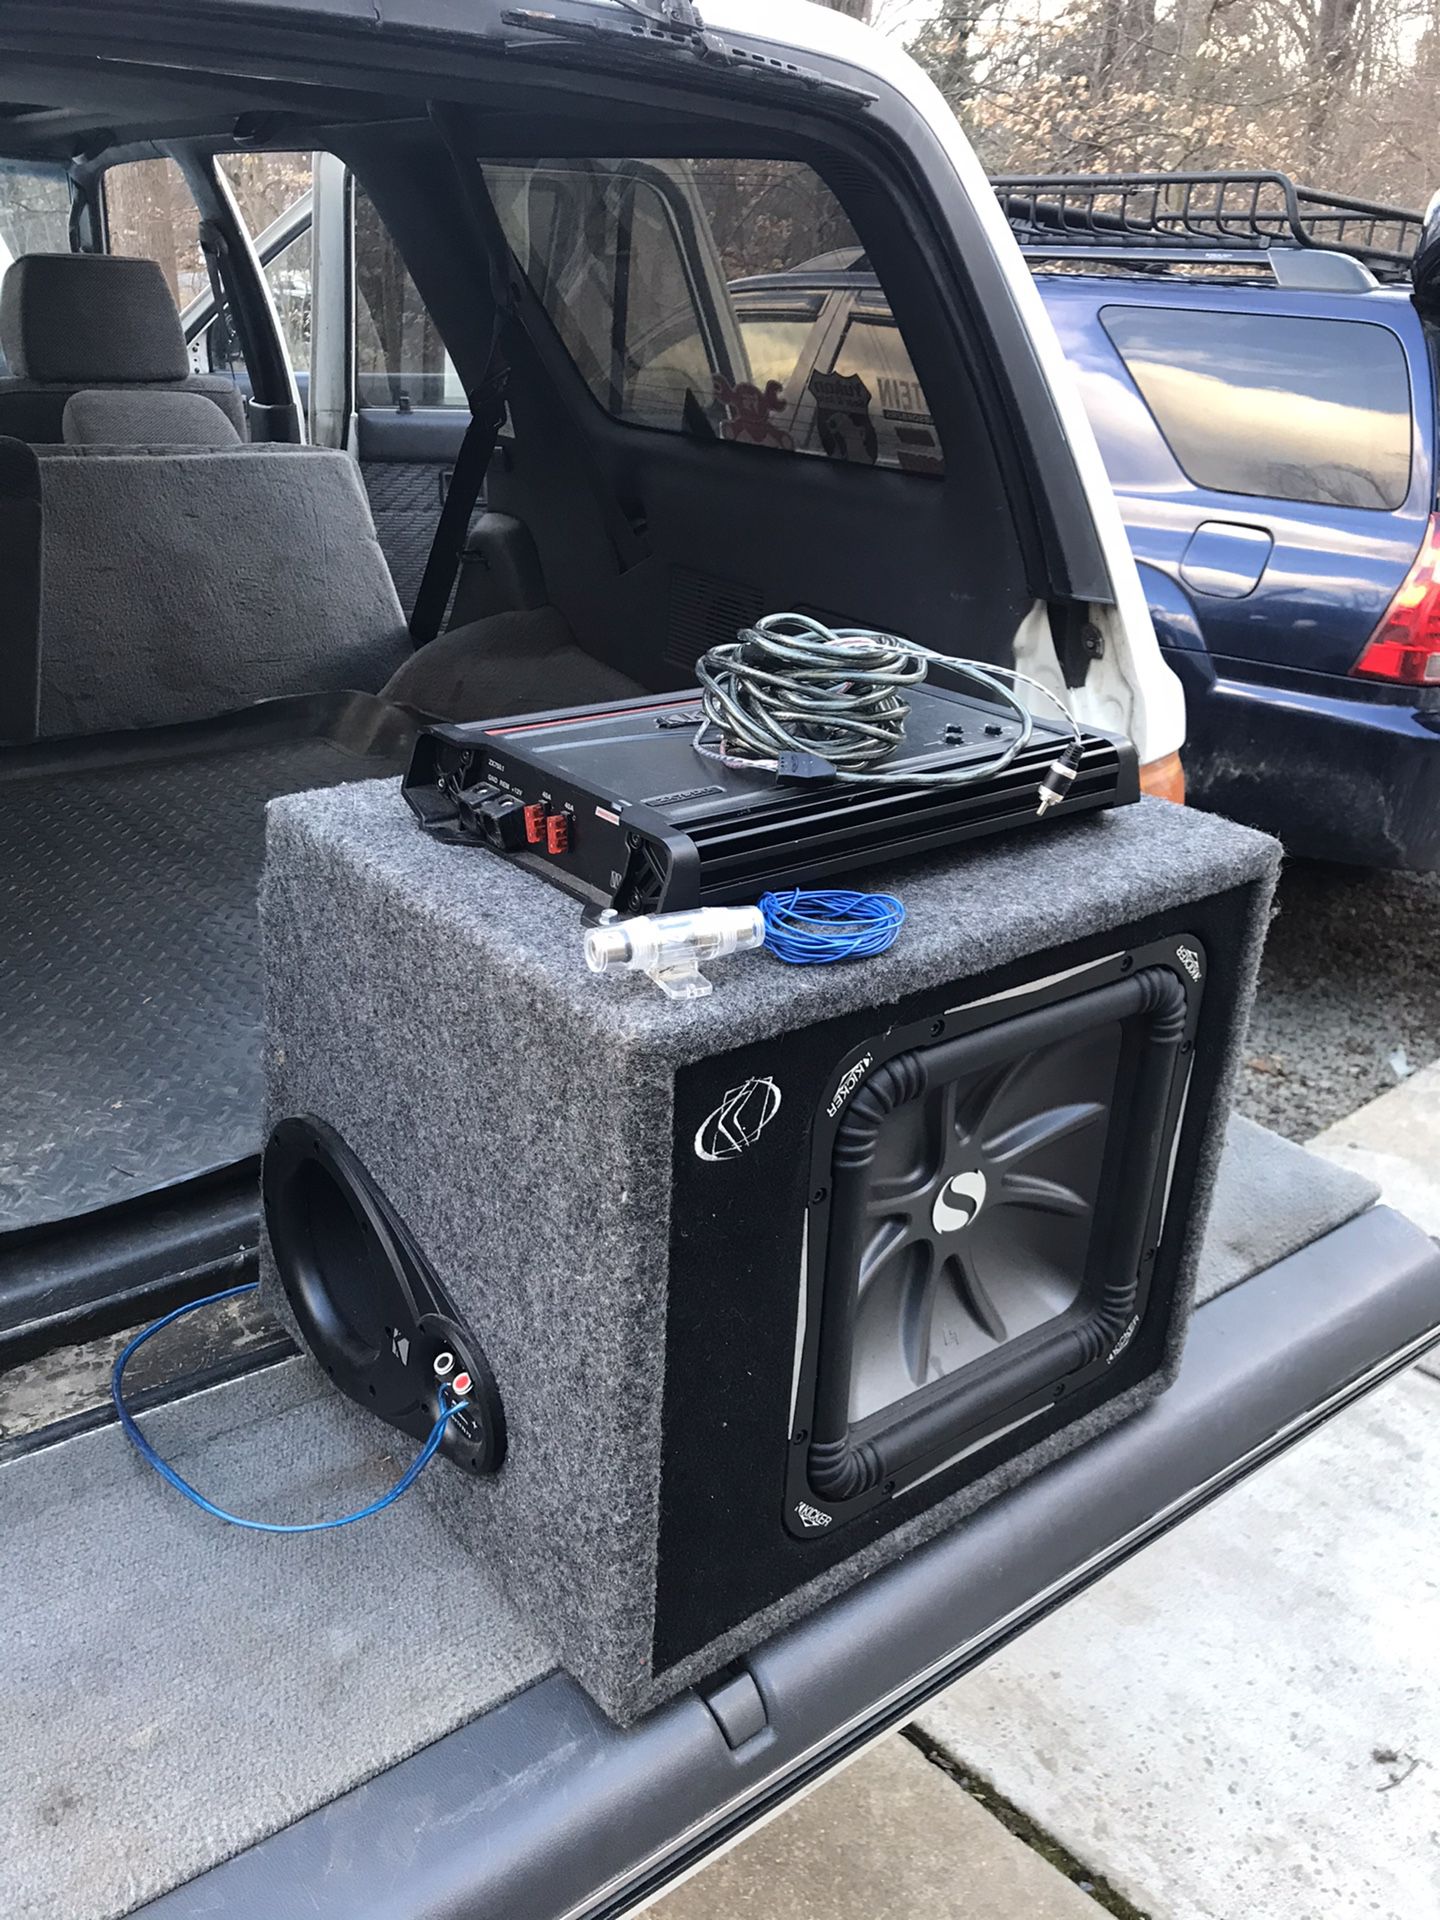 12” L7 sub, amp and other stuff